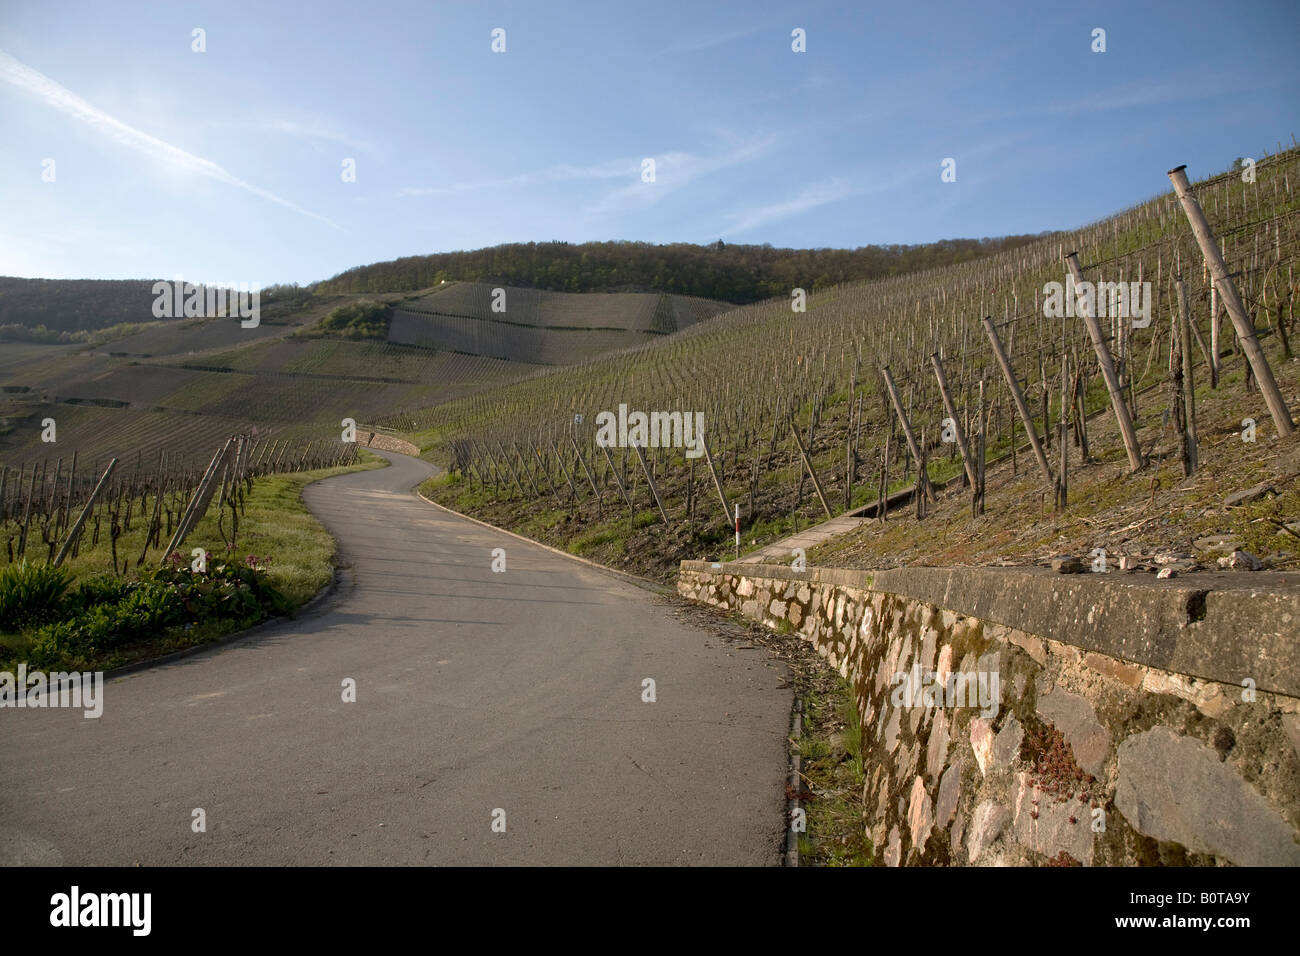 Road through the vineyards at Piesport on the Moselle river in Germany Stock Photo